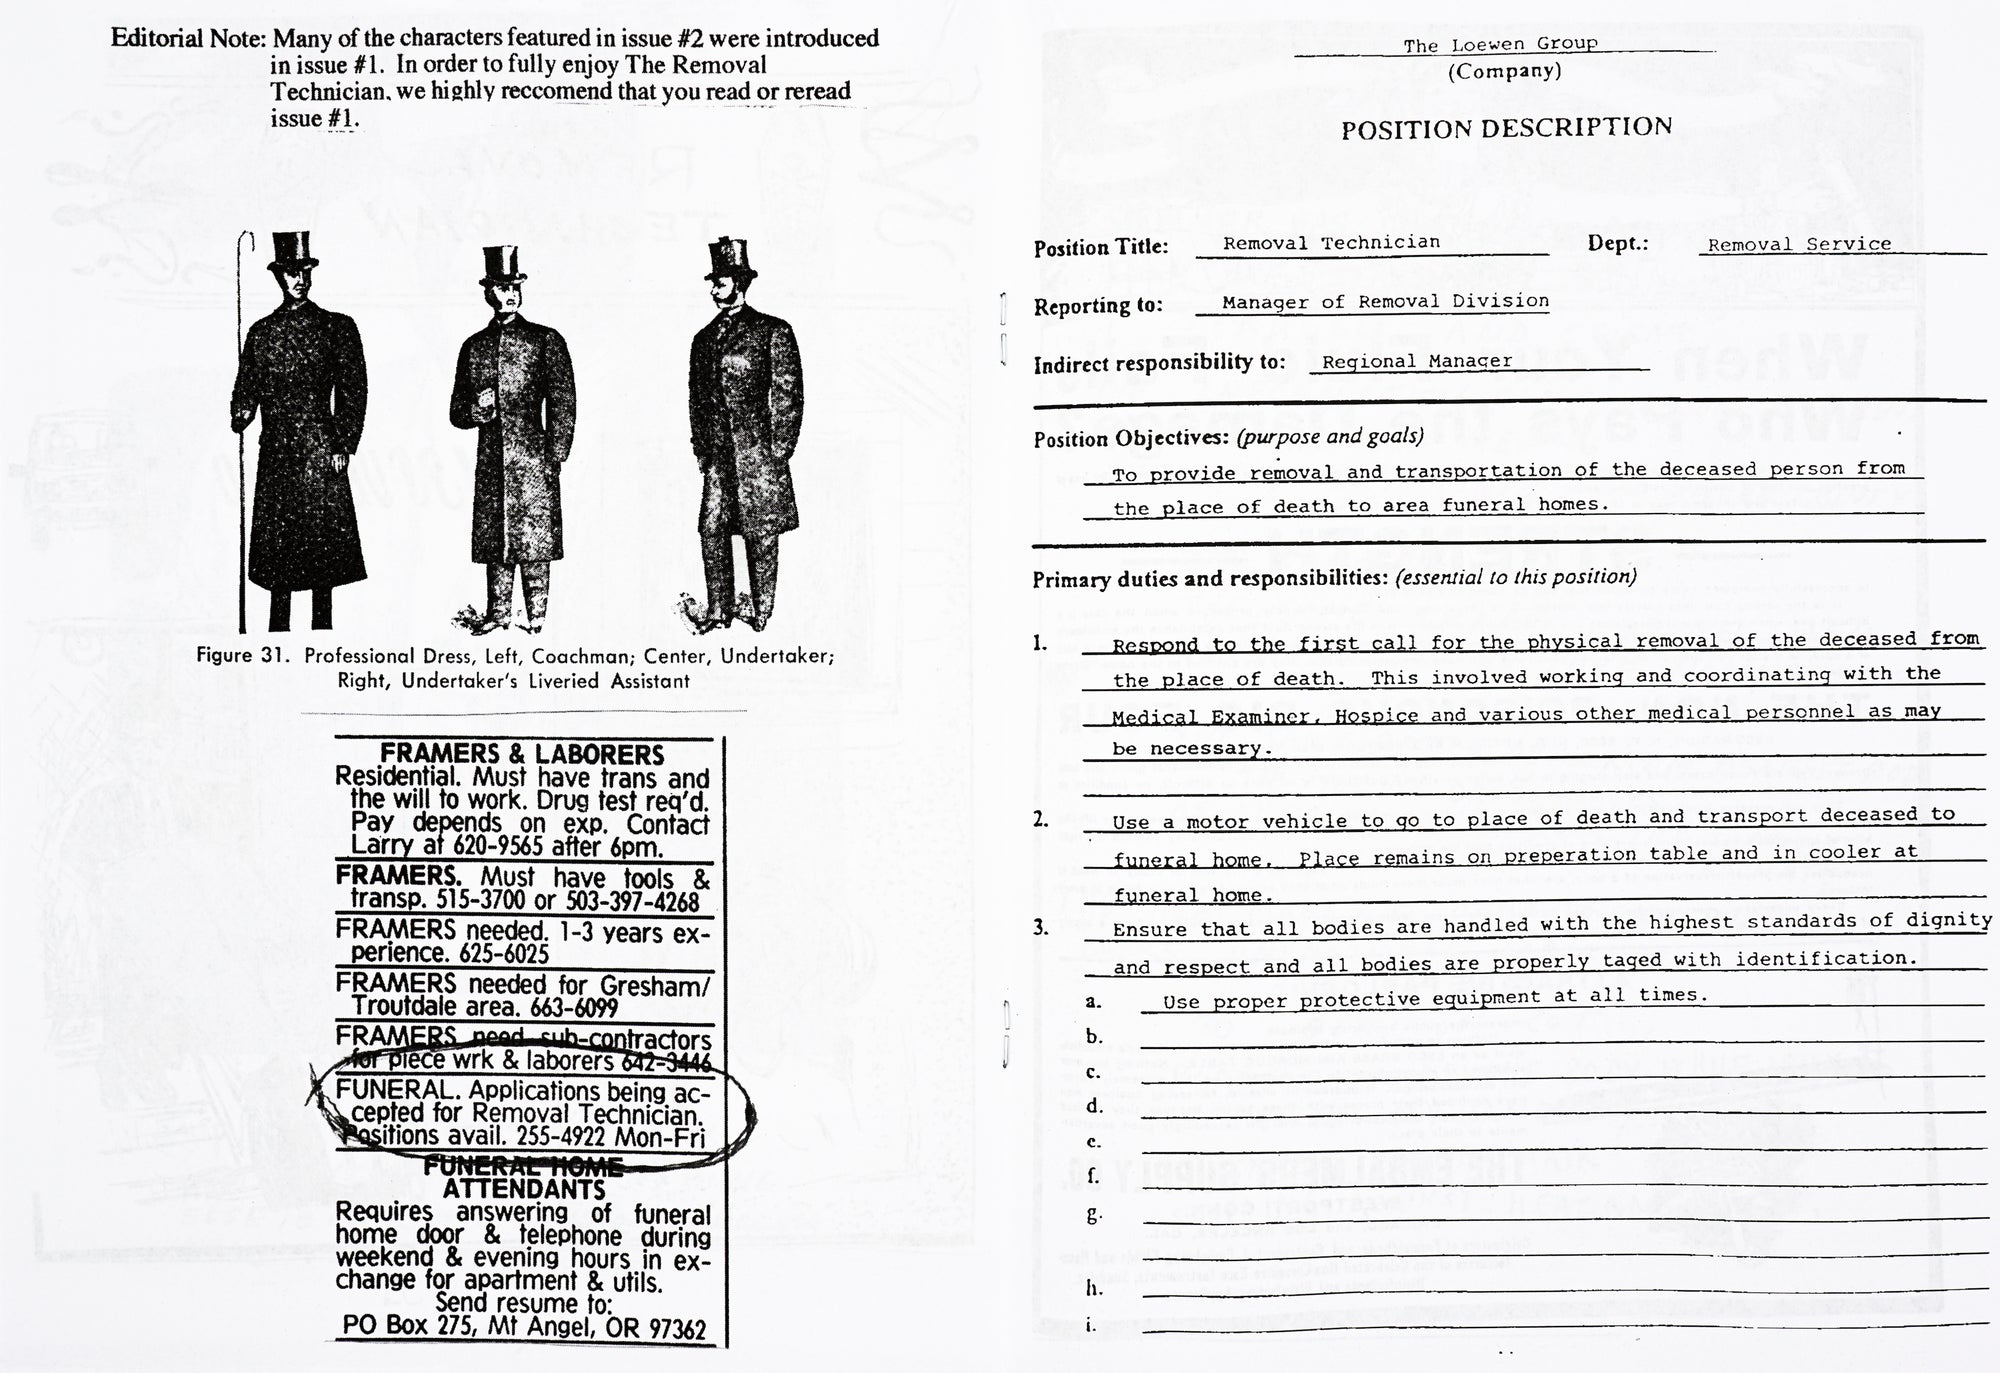 Spread of the book, on the left a newspaper clipping, on the right a typewritten document detailing the job of "Removal Technician"